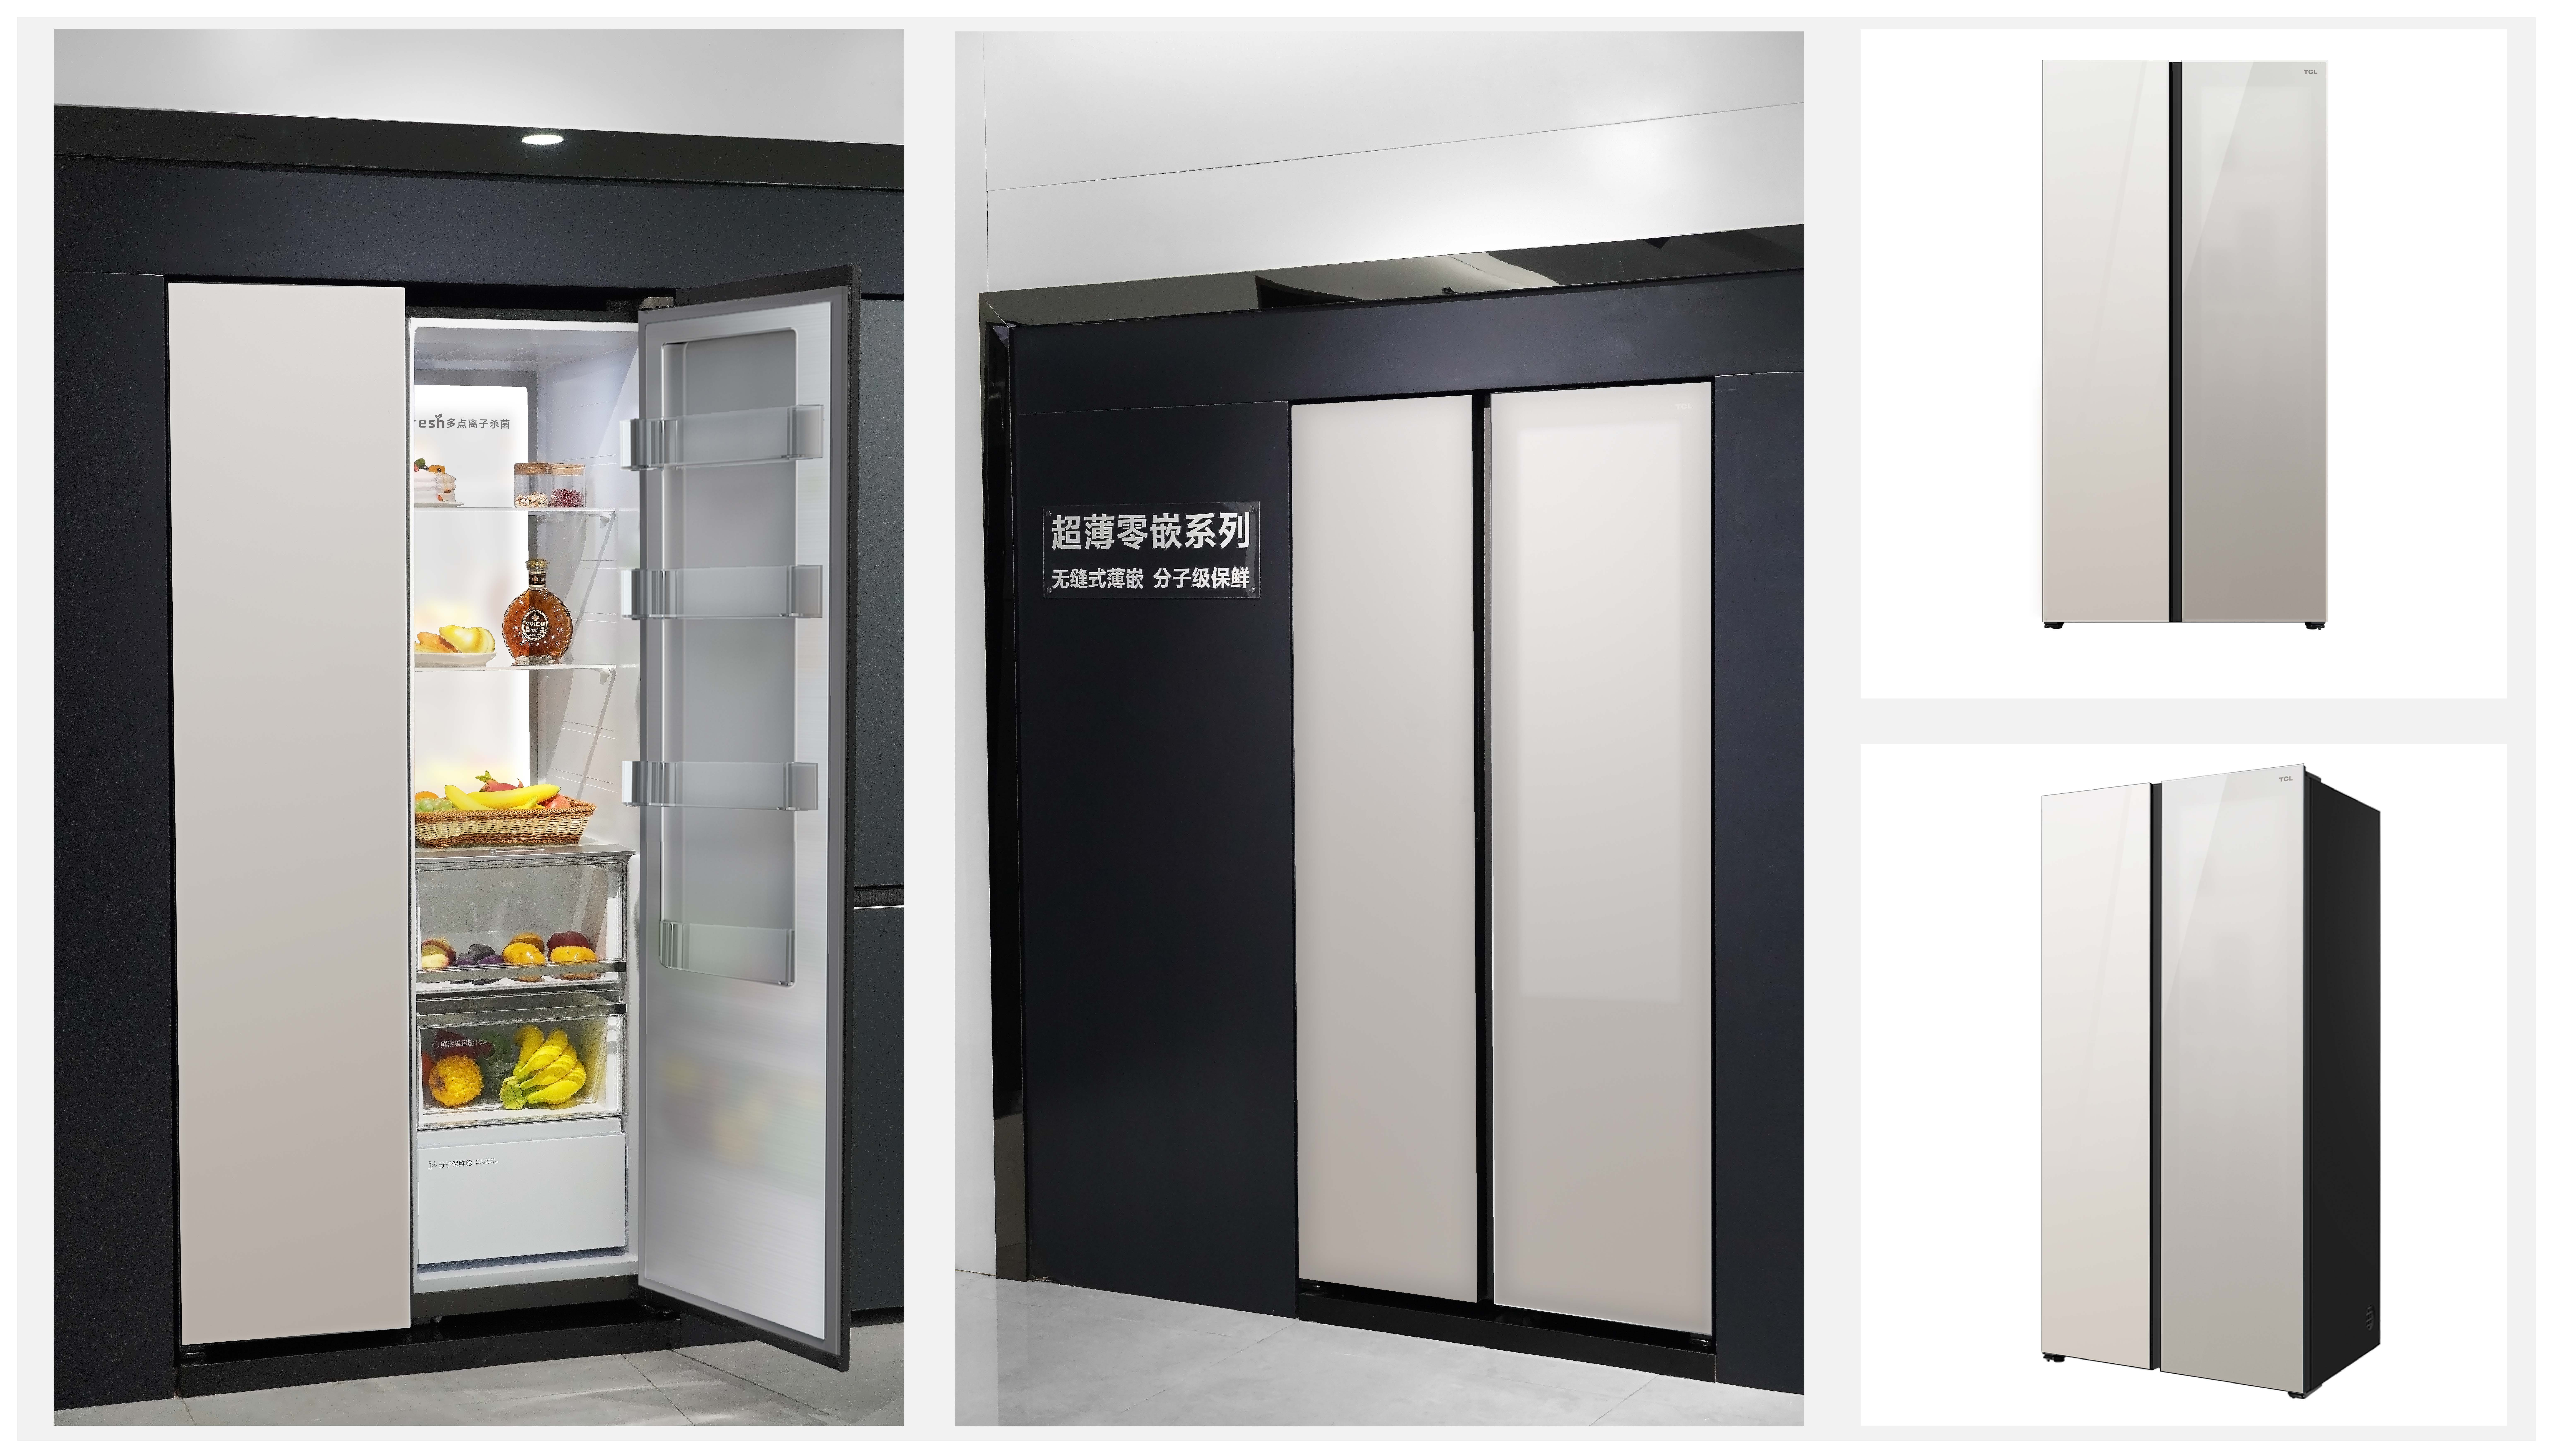 TCL Ultra Thin & Embeded SBS Refrigerator